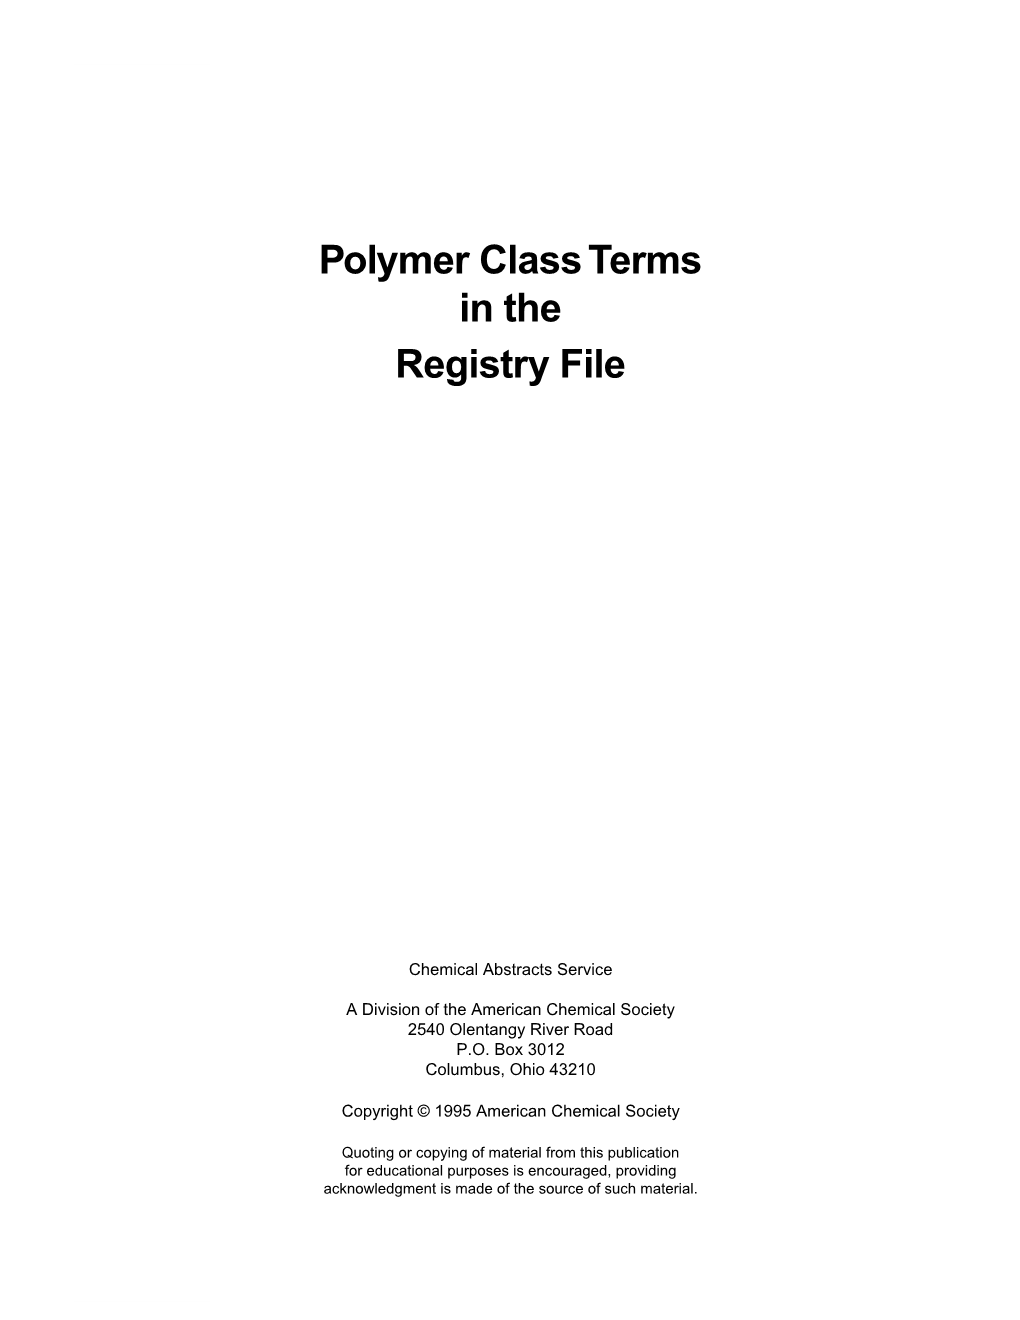 Polymer Class Terms in the Registry File